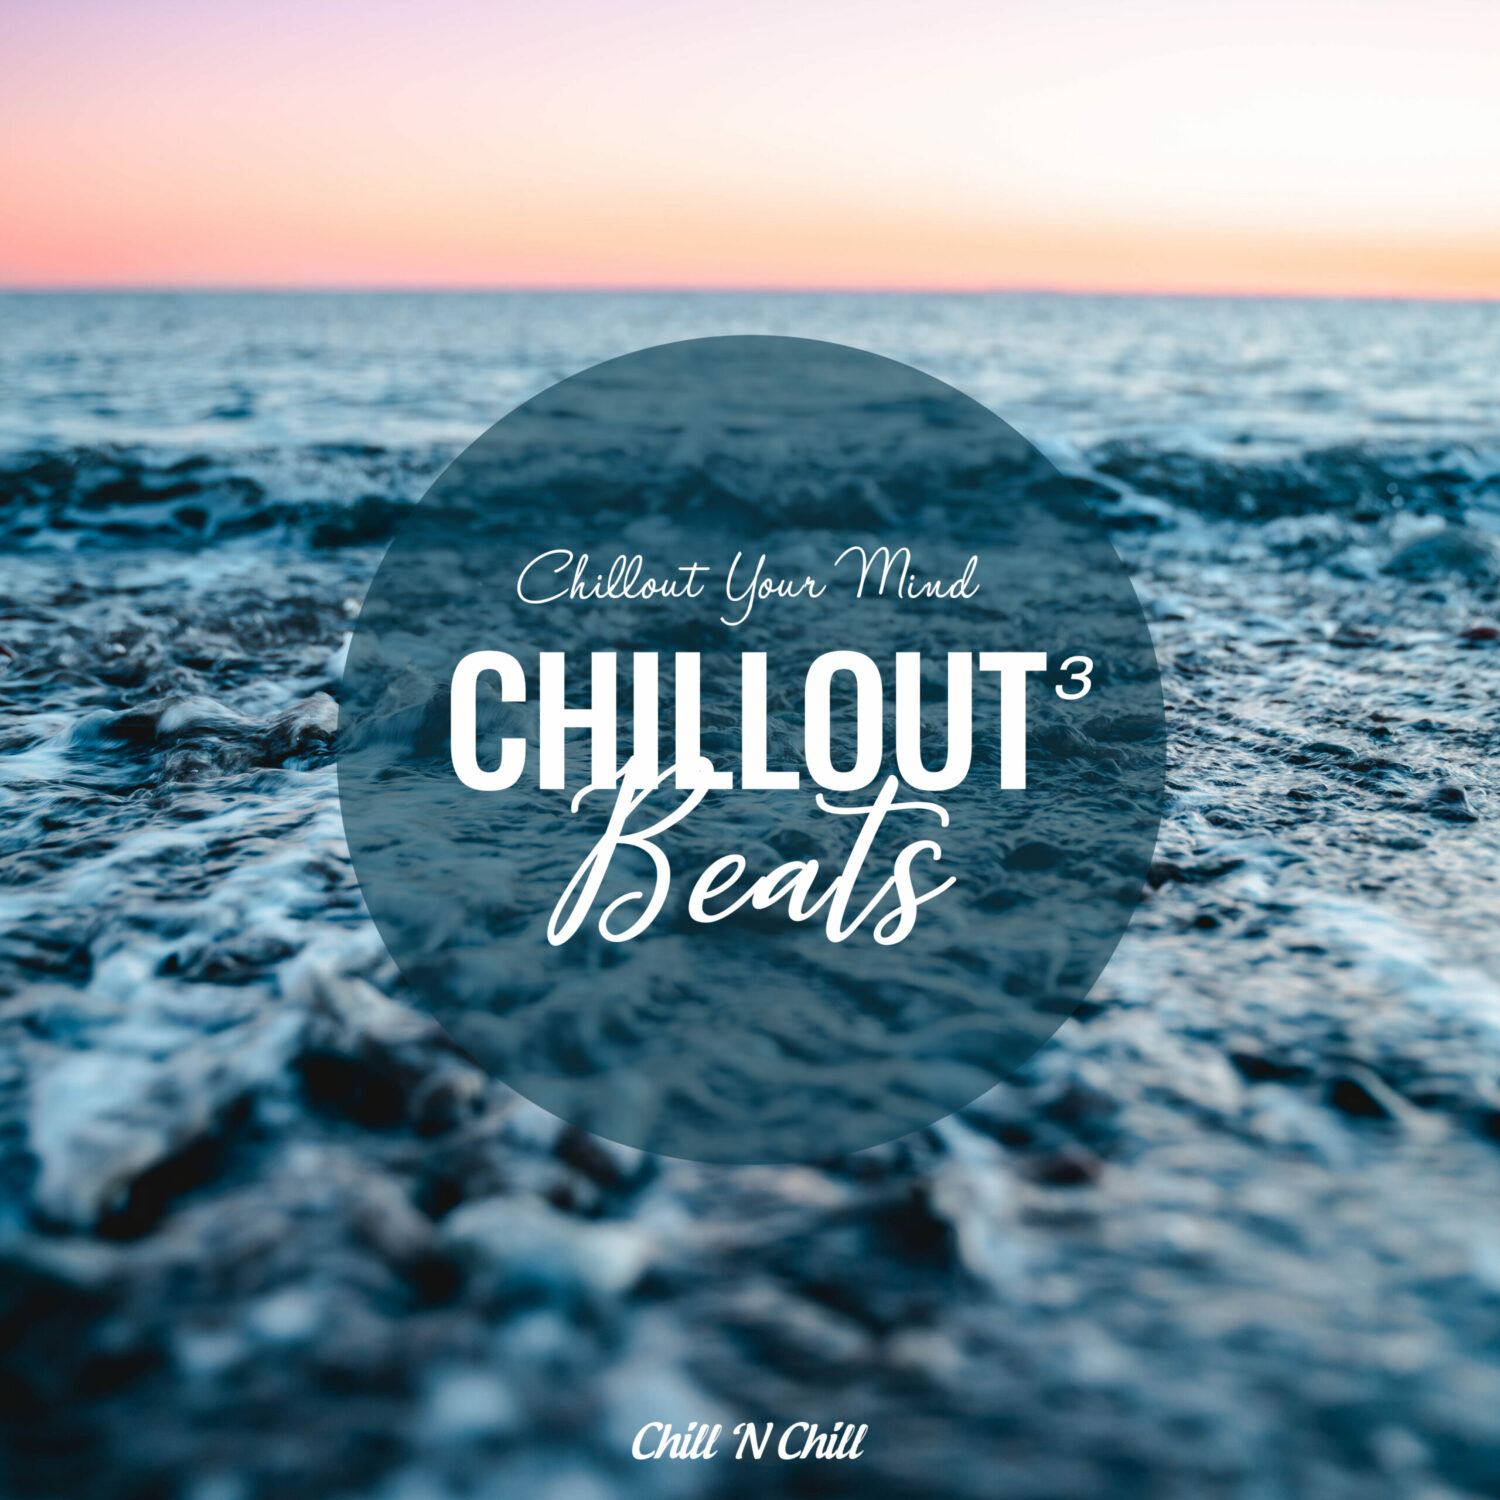 Chill n. Chillout. Chill your Mind. Record Chillout. Va Chillout 1999.